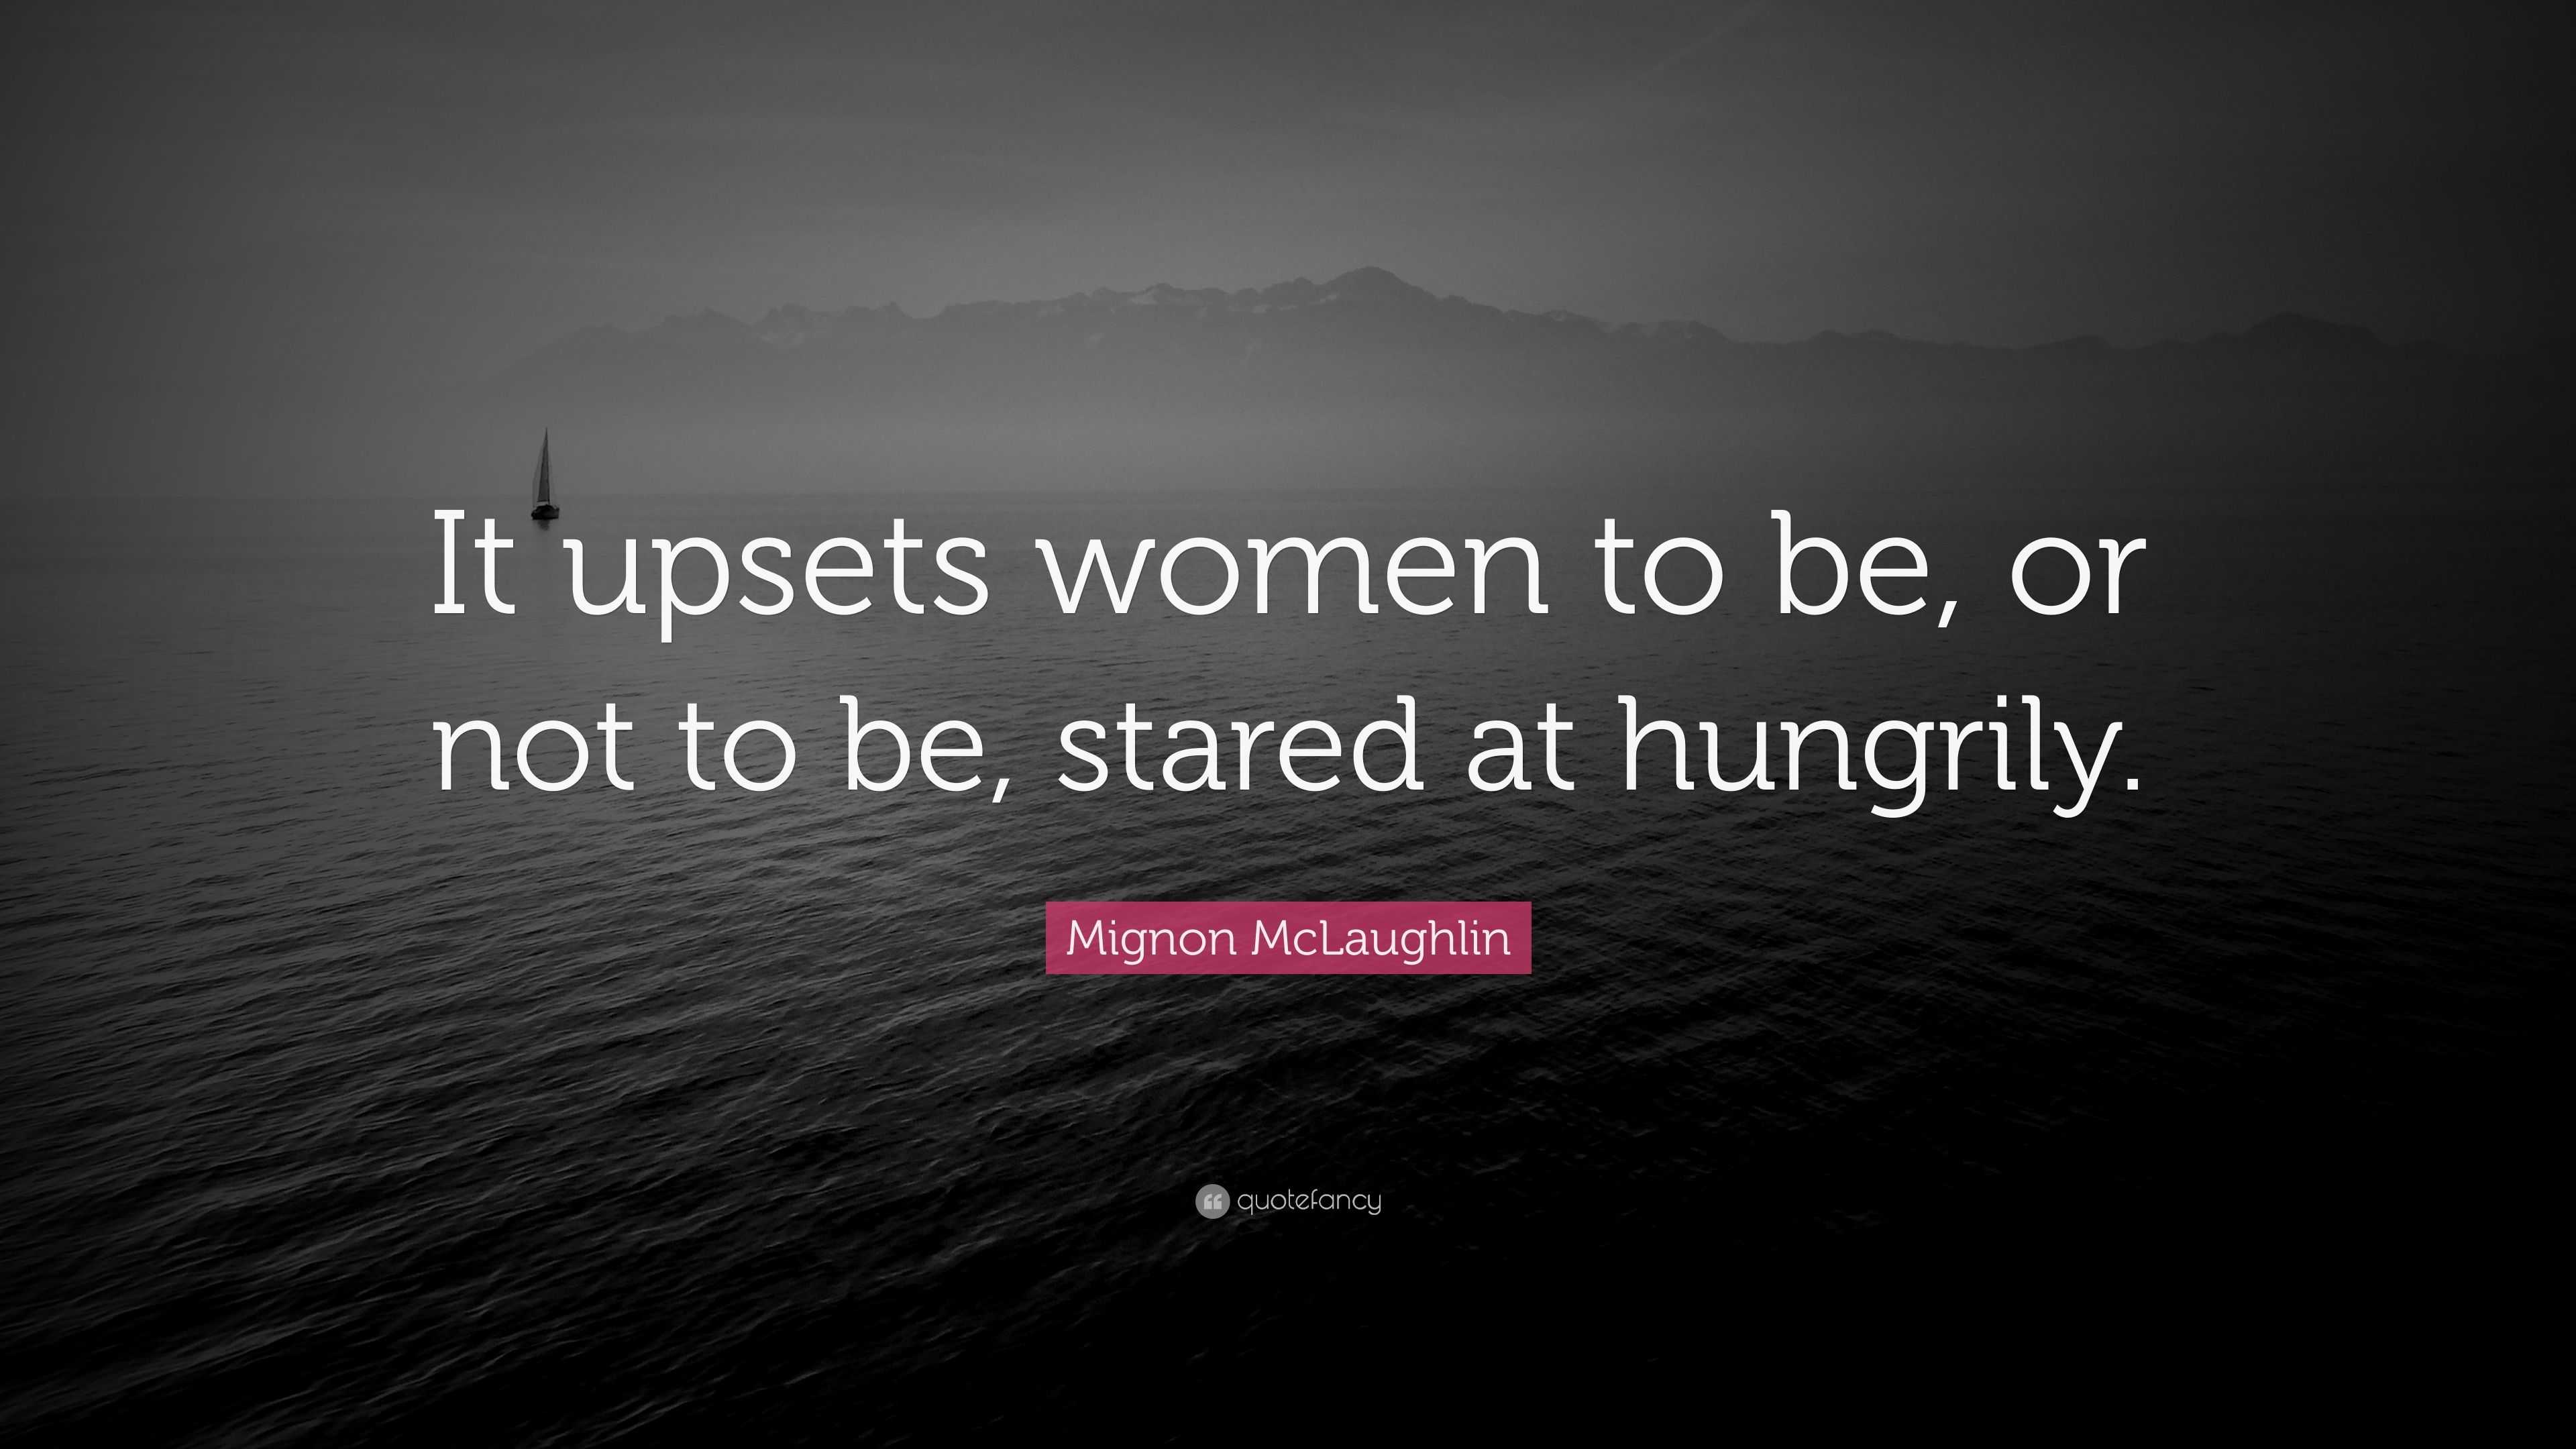 Mignon McLaughlin Quote: “It upsets women to be, or not to be, stared ...